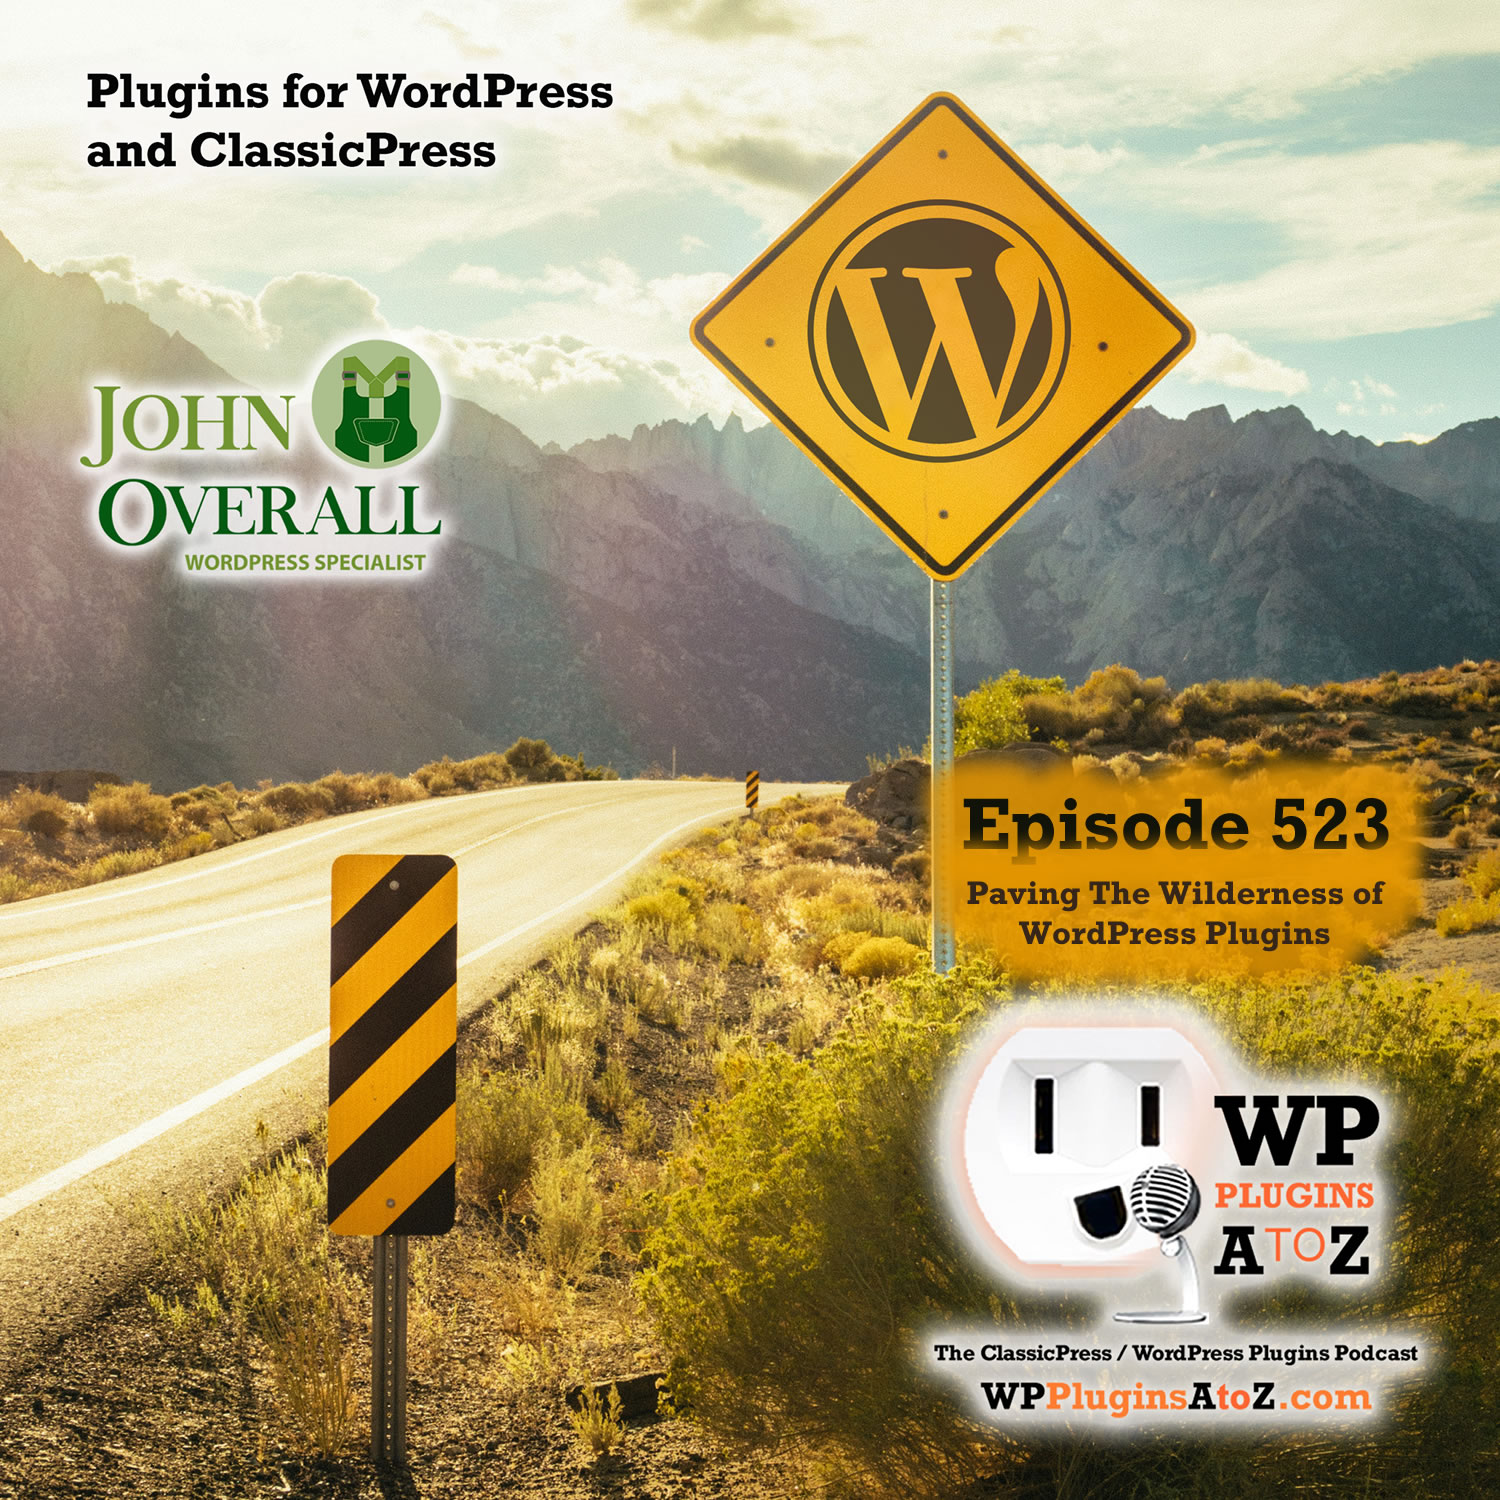 It's Episode 523 - We have plugins for Woocommerce Rewards, Creating Notes, Stop Fullscreen, Plugins checks, Moderate comments, Sales Funnels ... and ClassicPress Options. It's all coming up on WordPress Plugins A-Z!